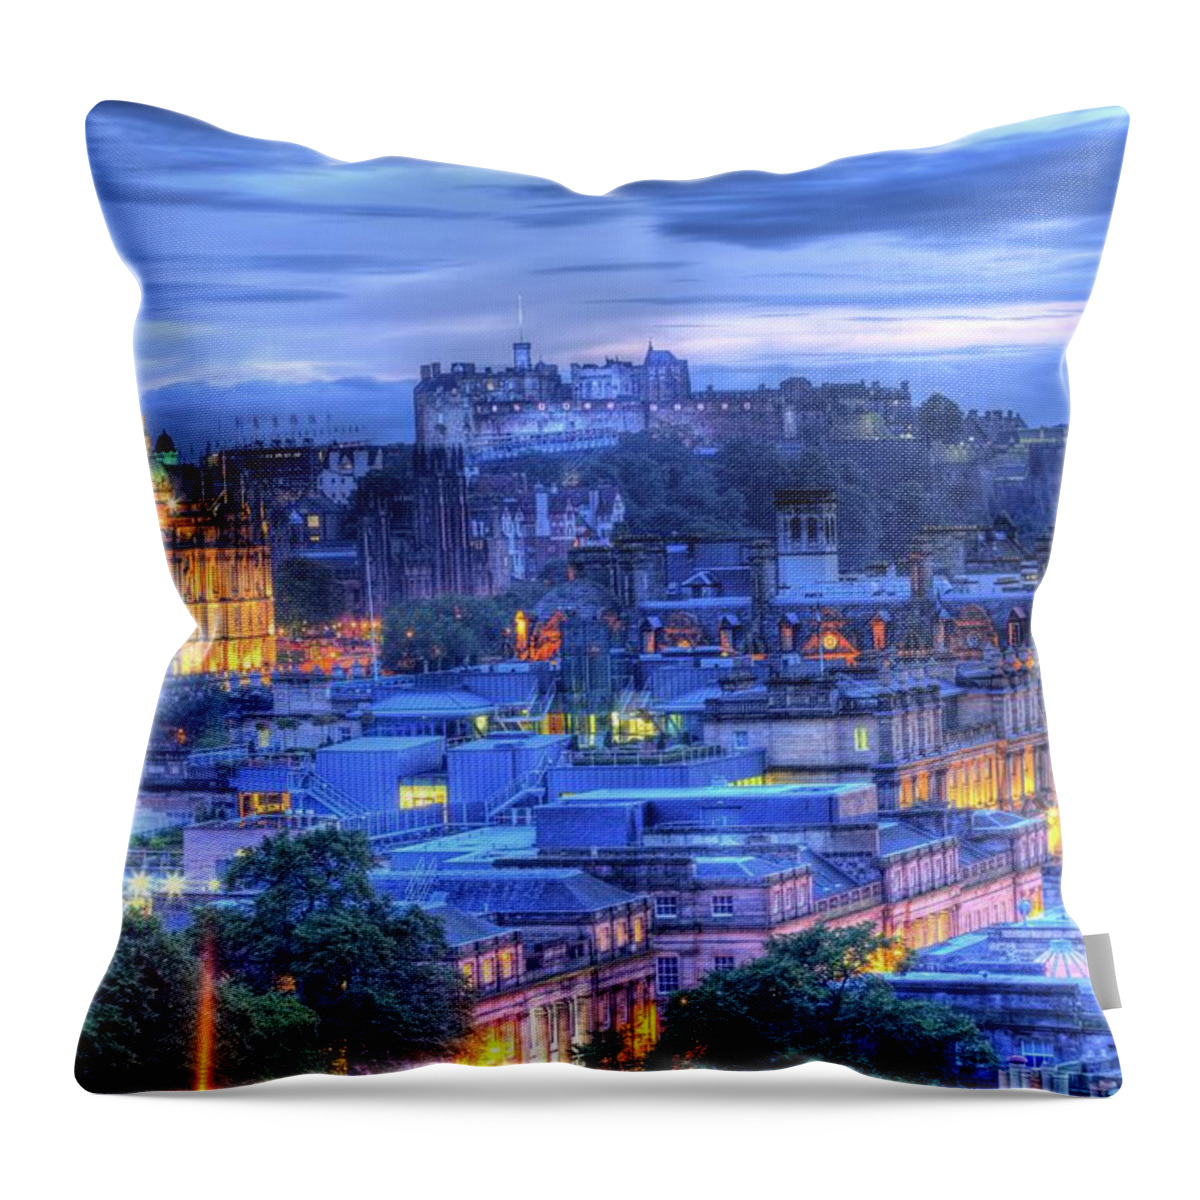 Tranquility Throw Pillow featuring the photograph Edinburgh Castle At Night by Exploring The World